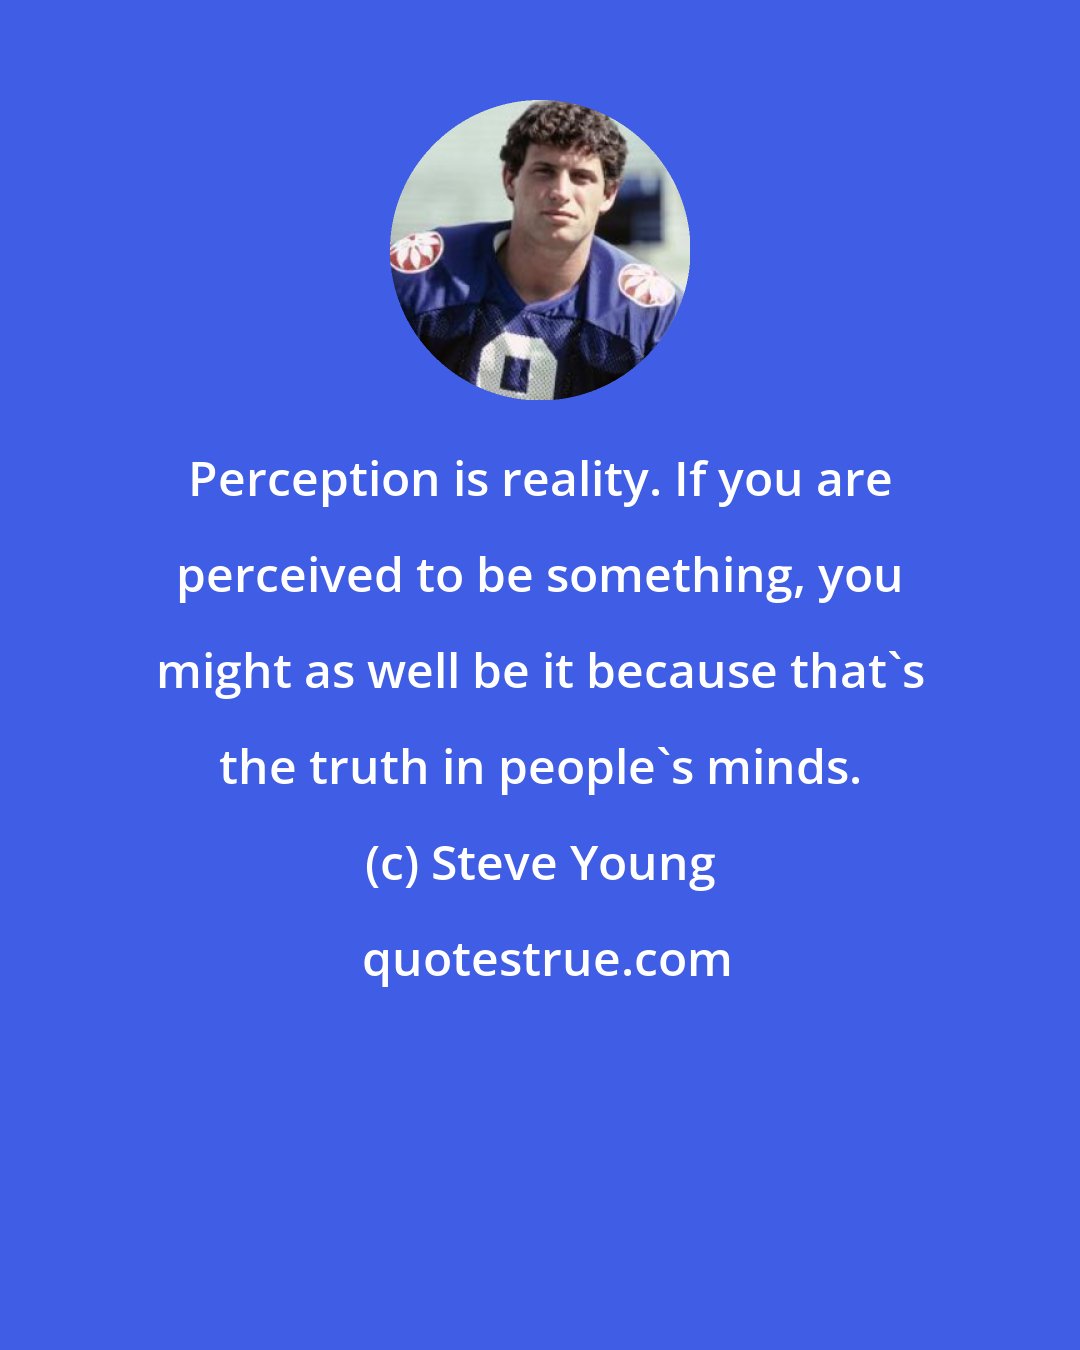 Steve Young: Perception is reality. If you are perceived to be something, you might as well be it because that's the truth in people's minds.